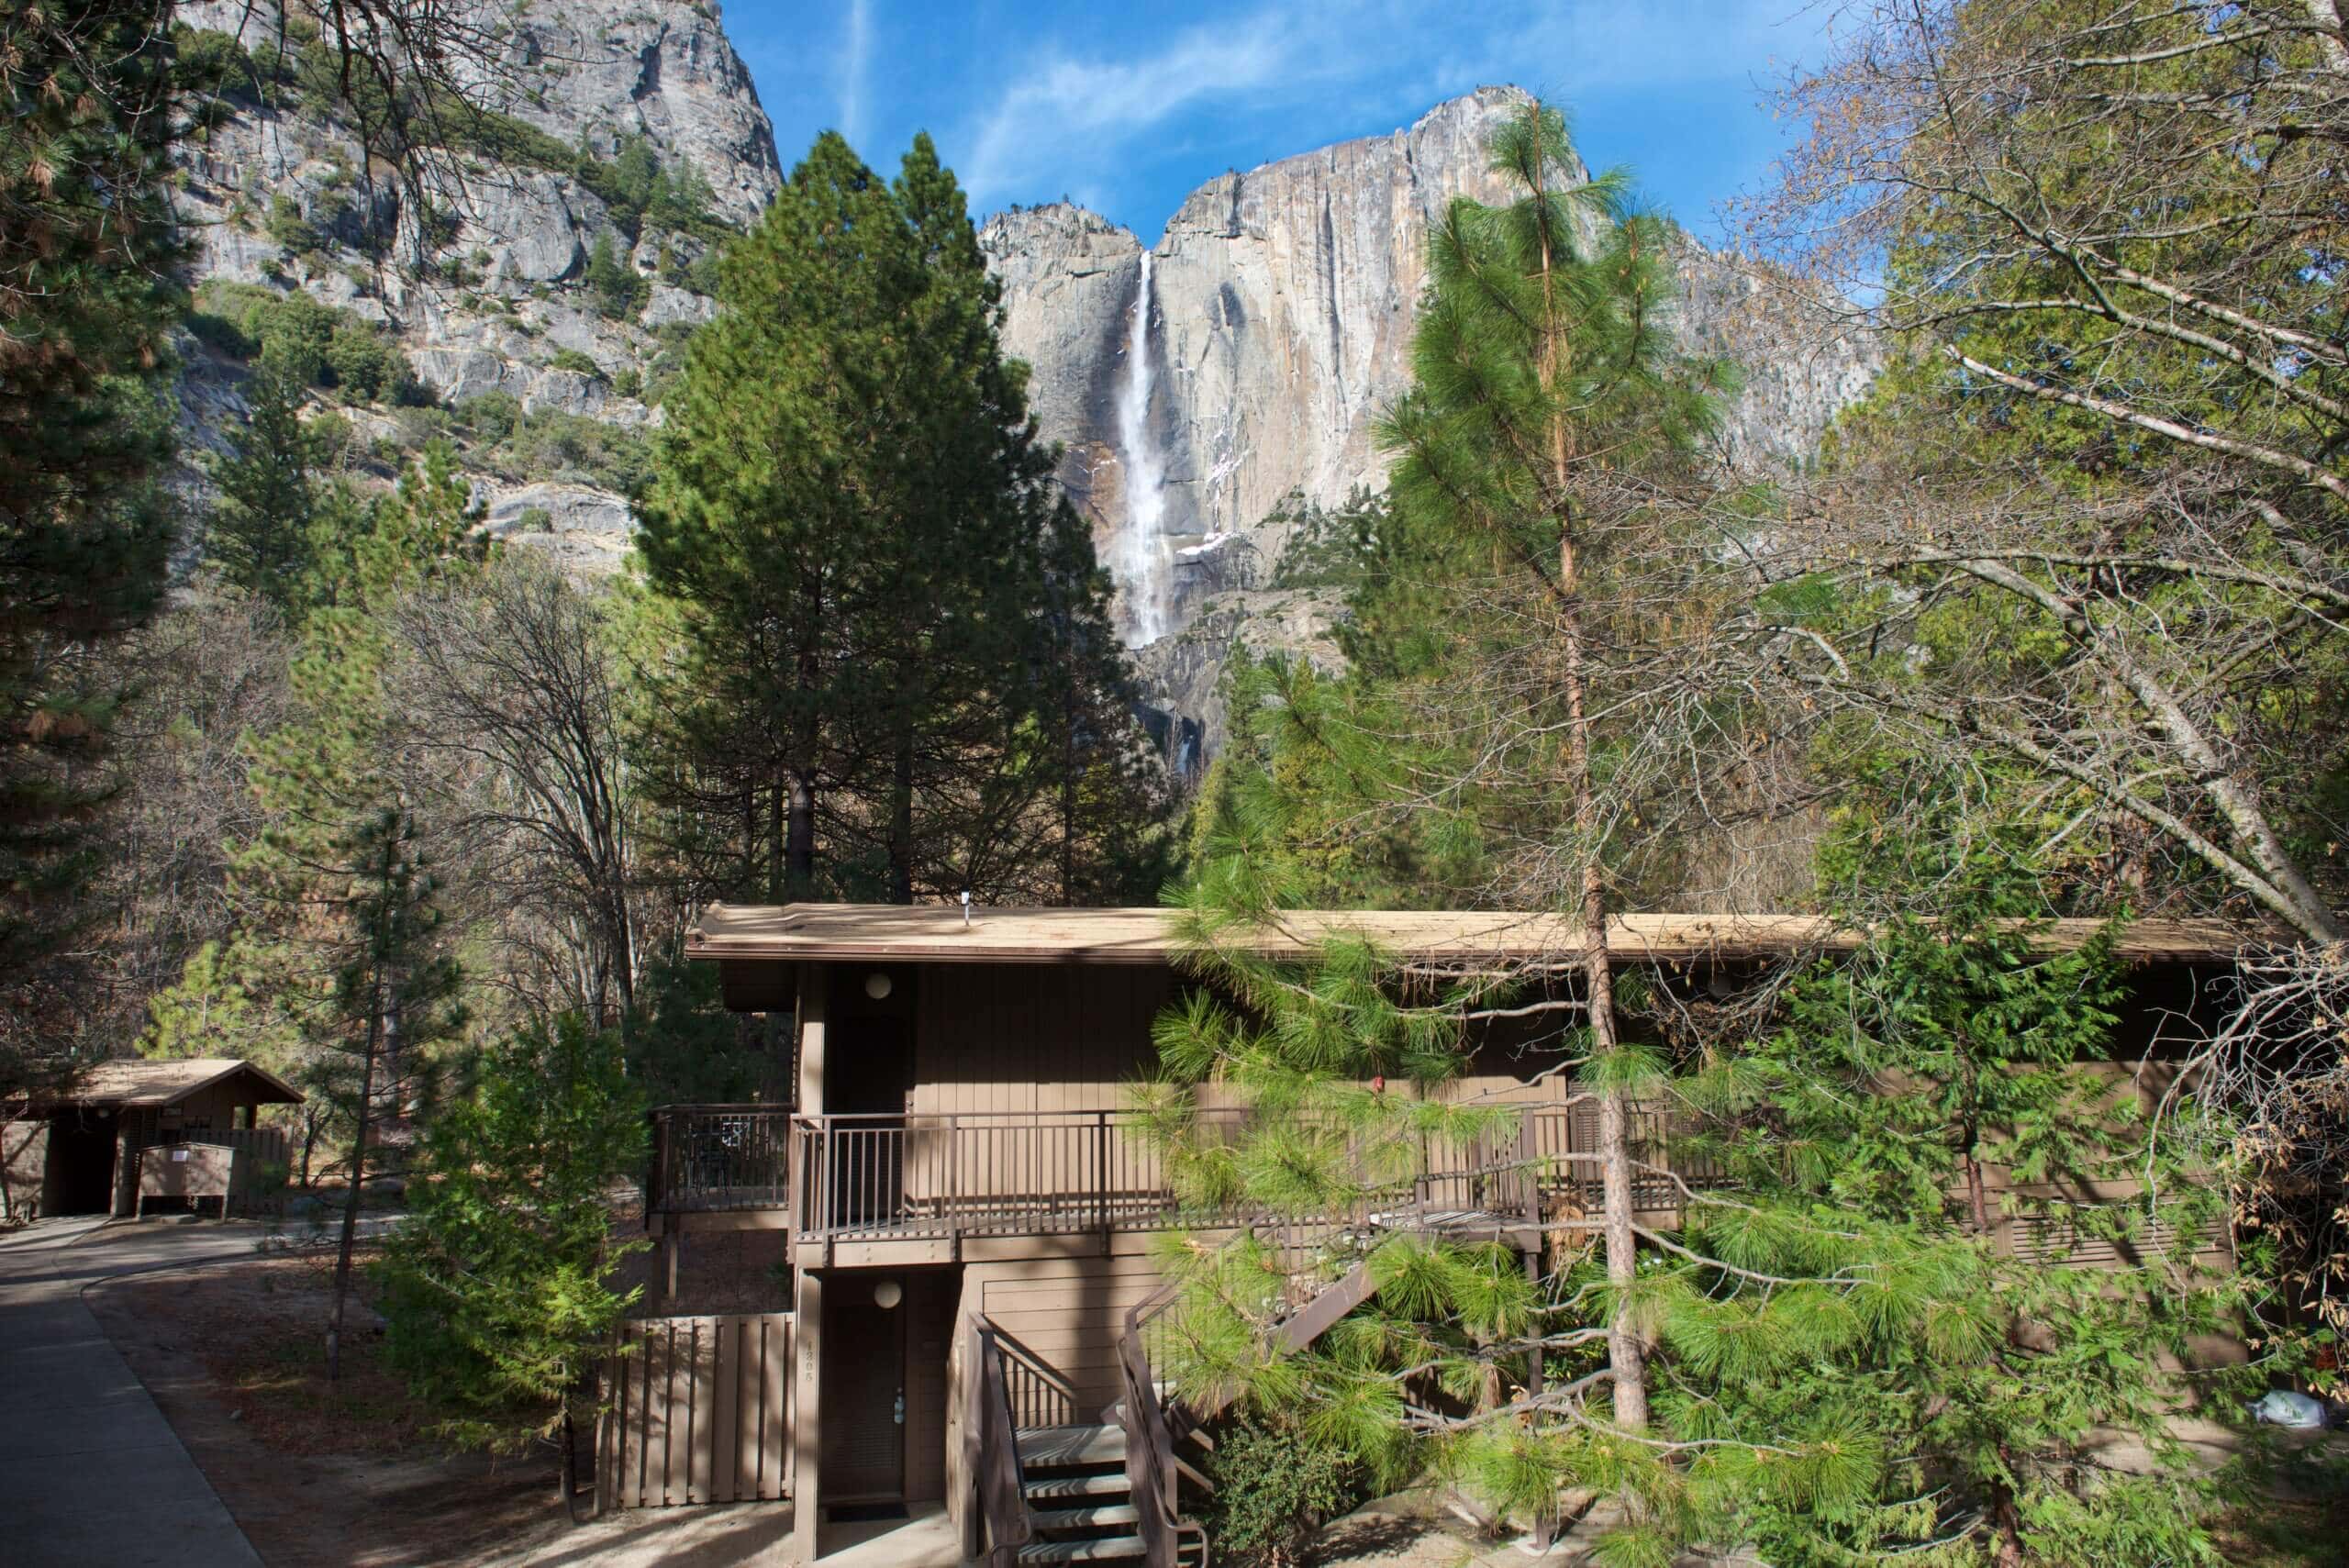 yosemite national park tourist attractions